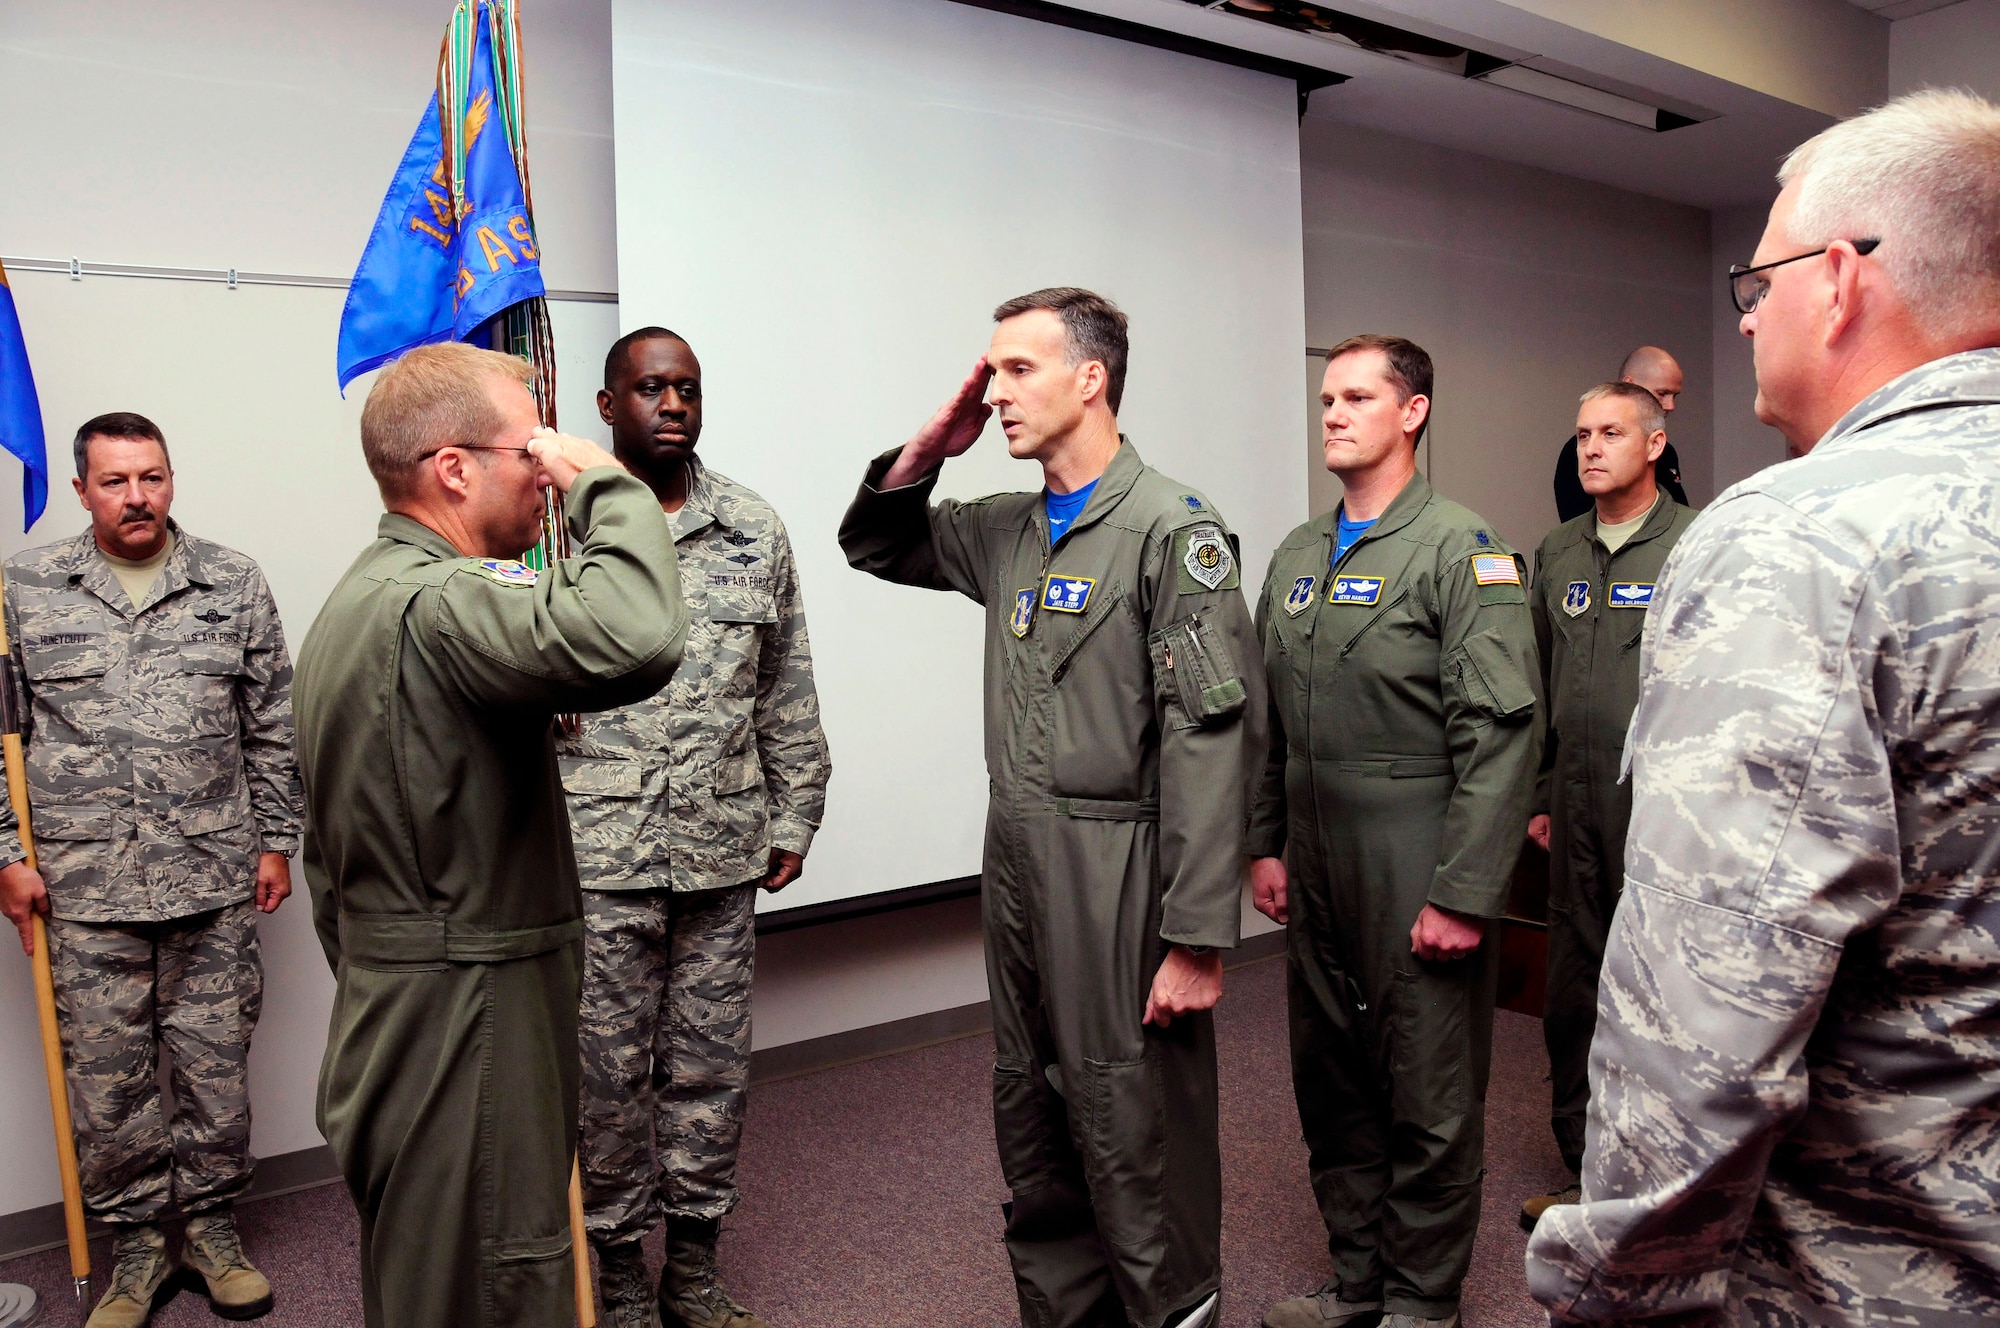 U.S. Air Force Col. Charles D. Davis III, commander of the 145th Operations Group, officiates over a change of command ceremony, as Lt. Col. Joseph H. Stepp IV relinquishes command of the 156th Airlift Squadron, June 6, 2015, at the North Carolina Air National Guard Base, Charlotte Douglas International Airport. (U.S. Air National Guard photo by Master Sgt. Patricia F. Moran, 145th Public Affairs/Released)